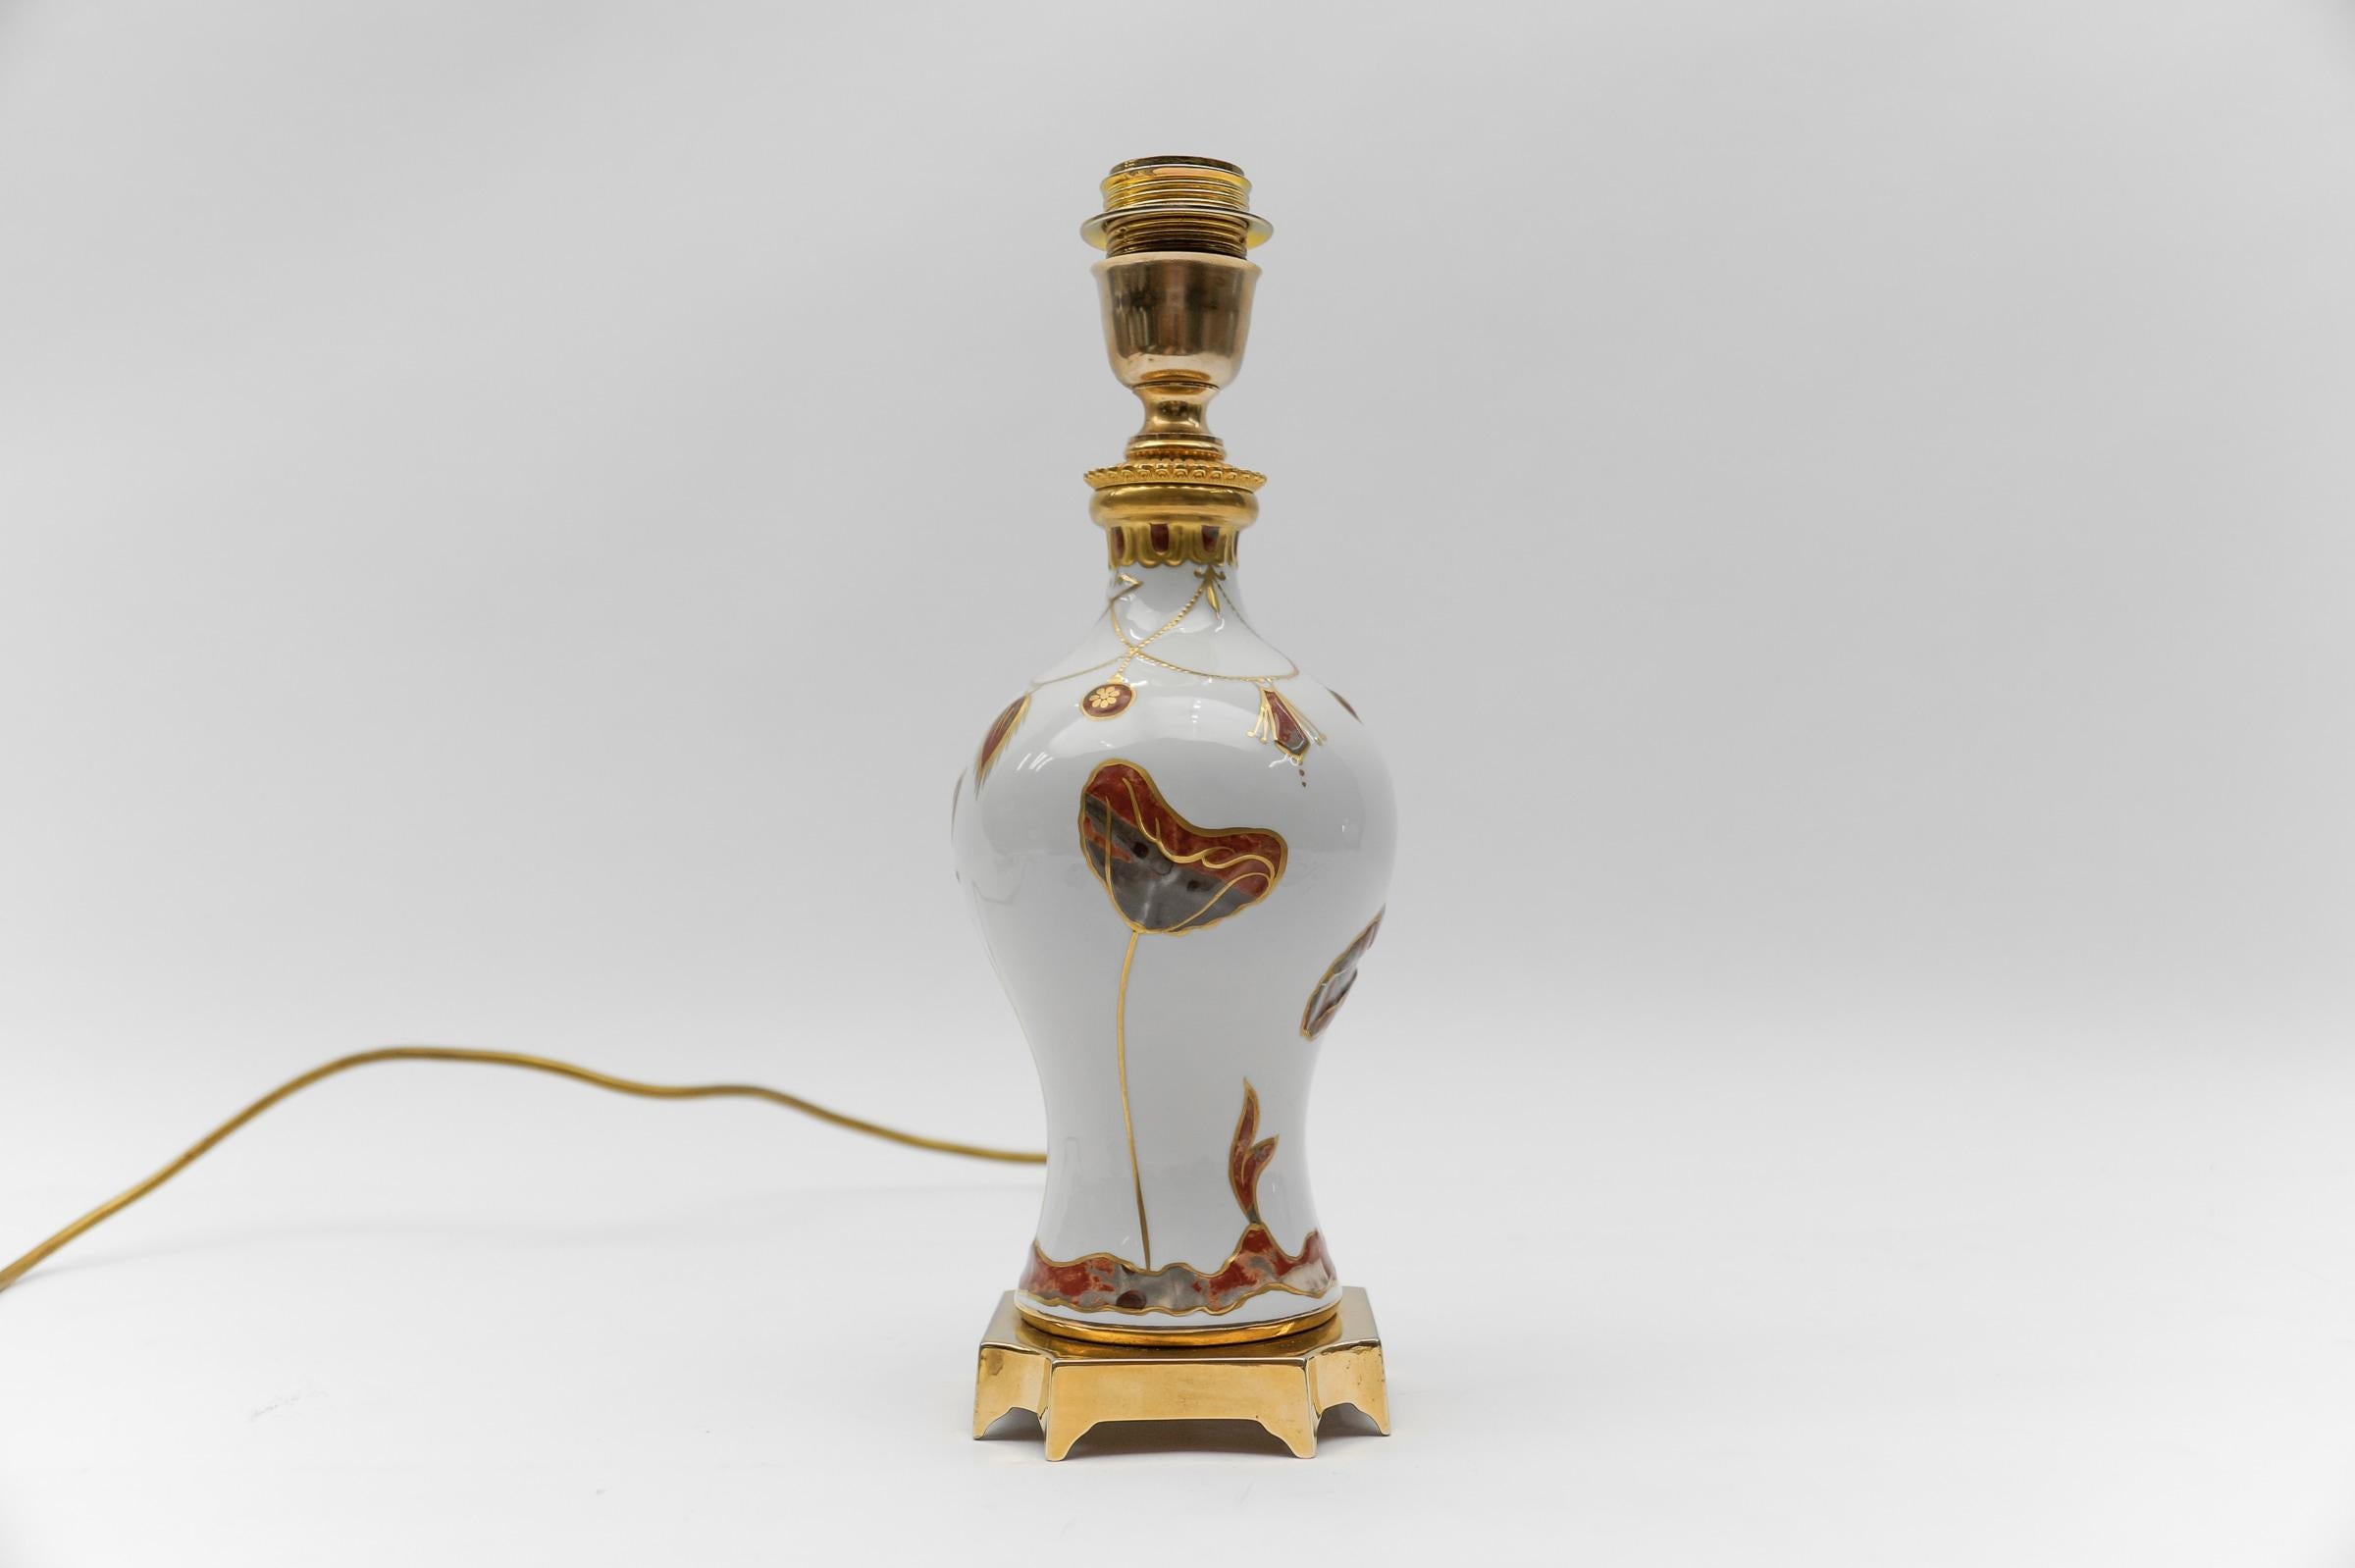 Sevres Modele et Decoration Exclusive a la Main Handmade Table Lamp Base, 1960s

Dimensions
Diameter: 5.11 in. (13 cm)
Height: 13.38 in. (34 cm)

One E27 socket. Works with 220V and 110V.

Our lamps are checked, cleaned and are suitable for use in